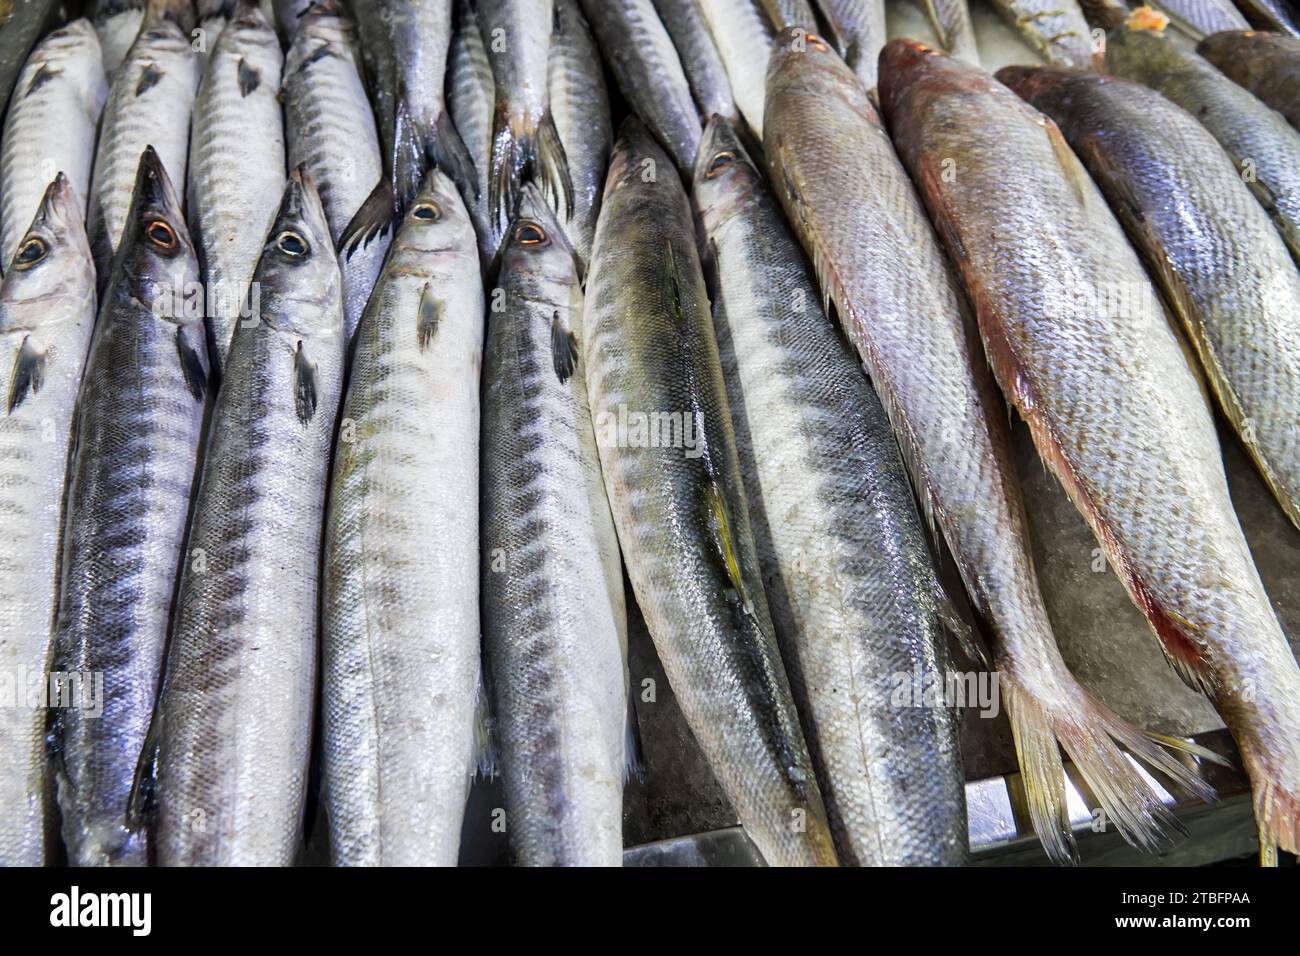 Bandar Abbas, Iran. Fish market. The fish of the Persian Gulf and the Arabian Sea are caught and sold Stock Photo